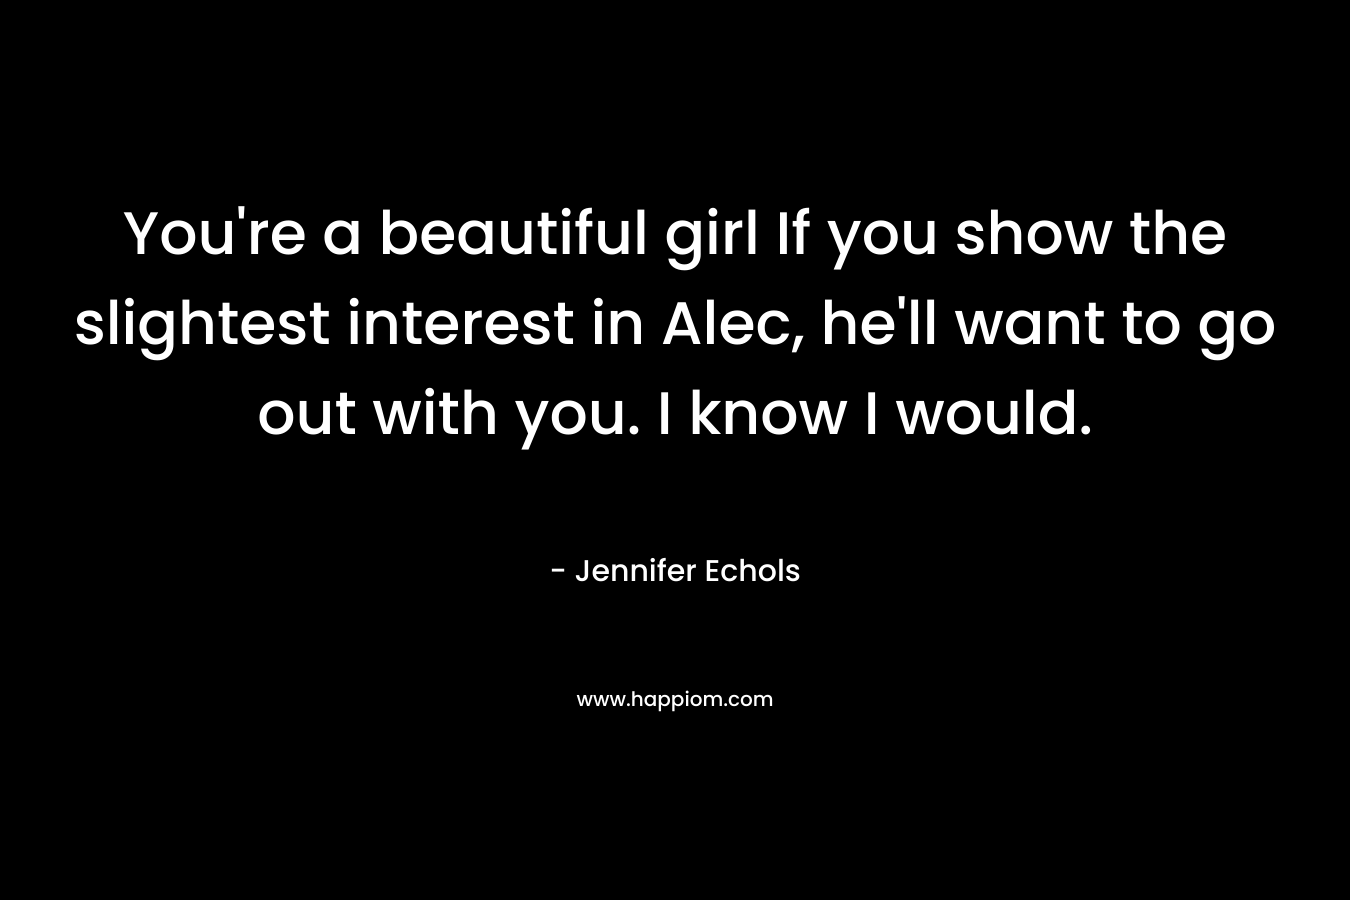 You’re a beautiful girl If you show the slightest interest in Alec, he’ll want to go out with you. I know I would. – Jennifer Echols